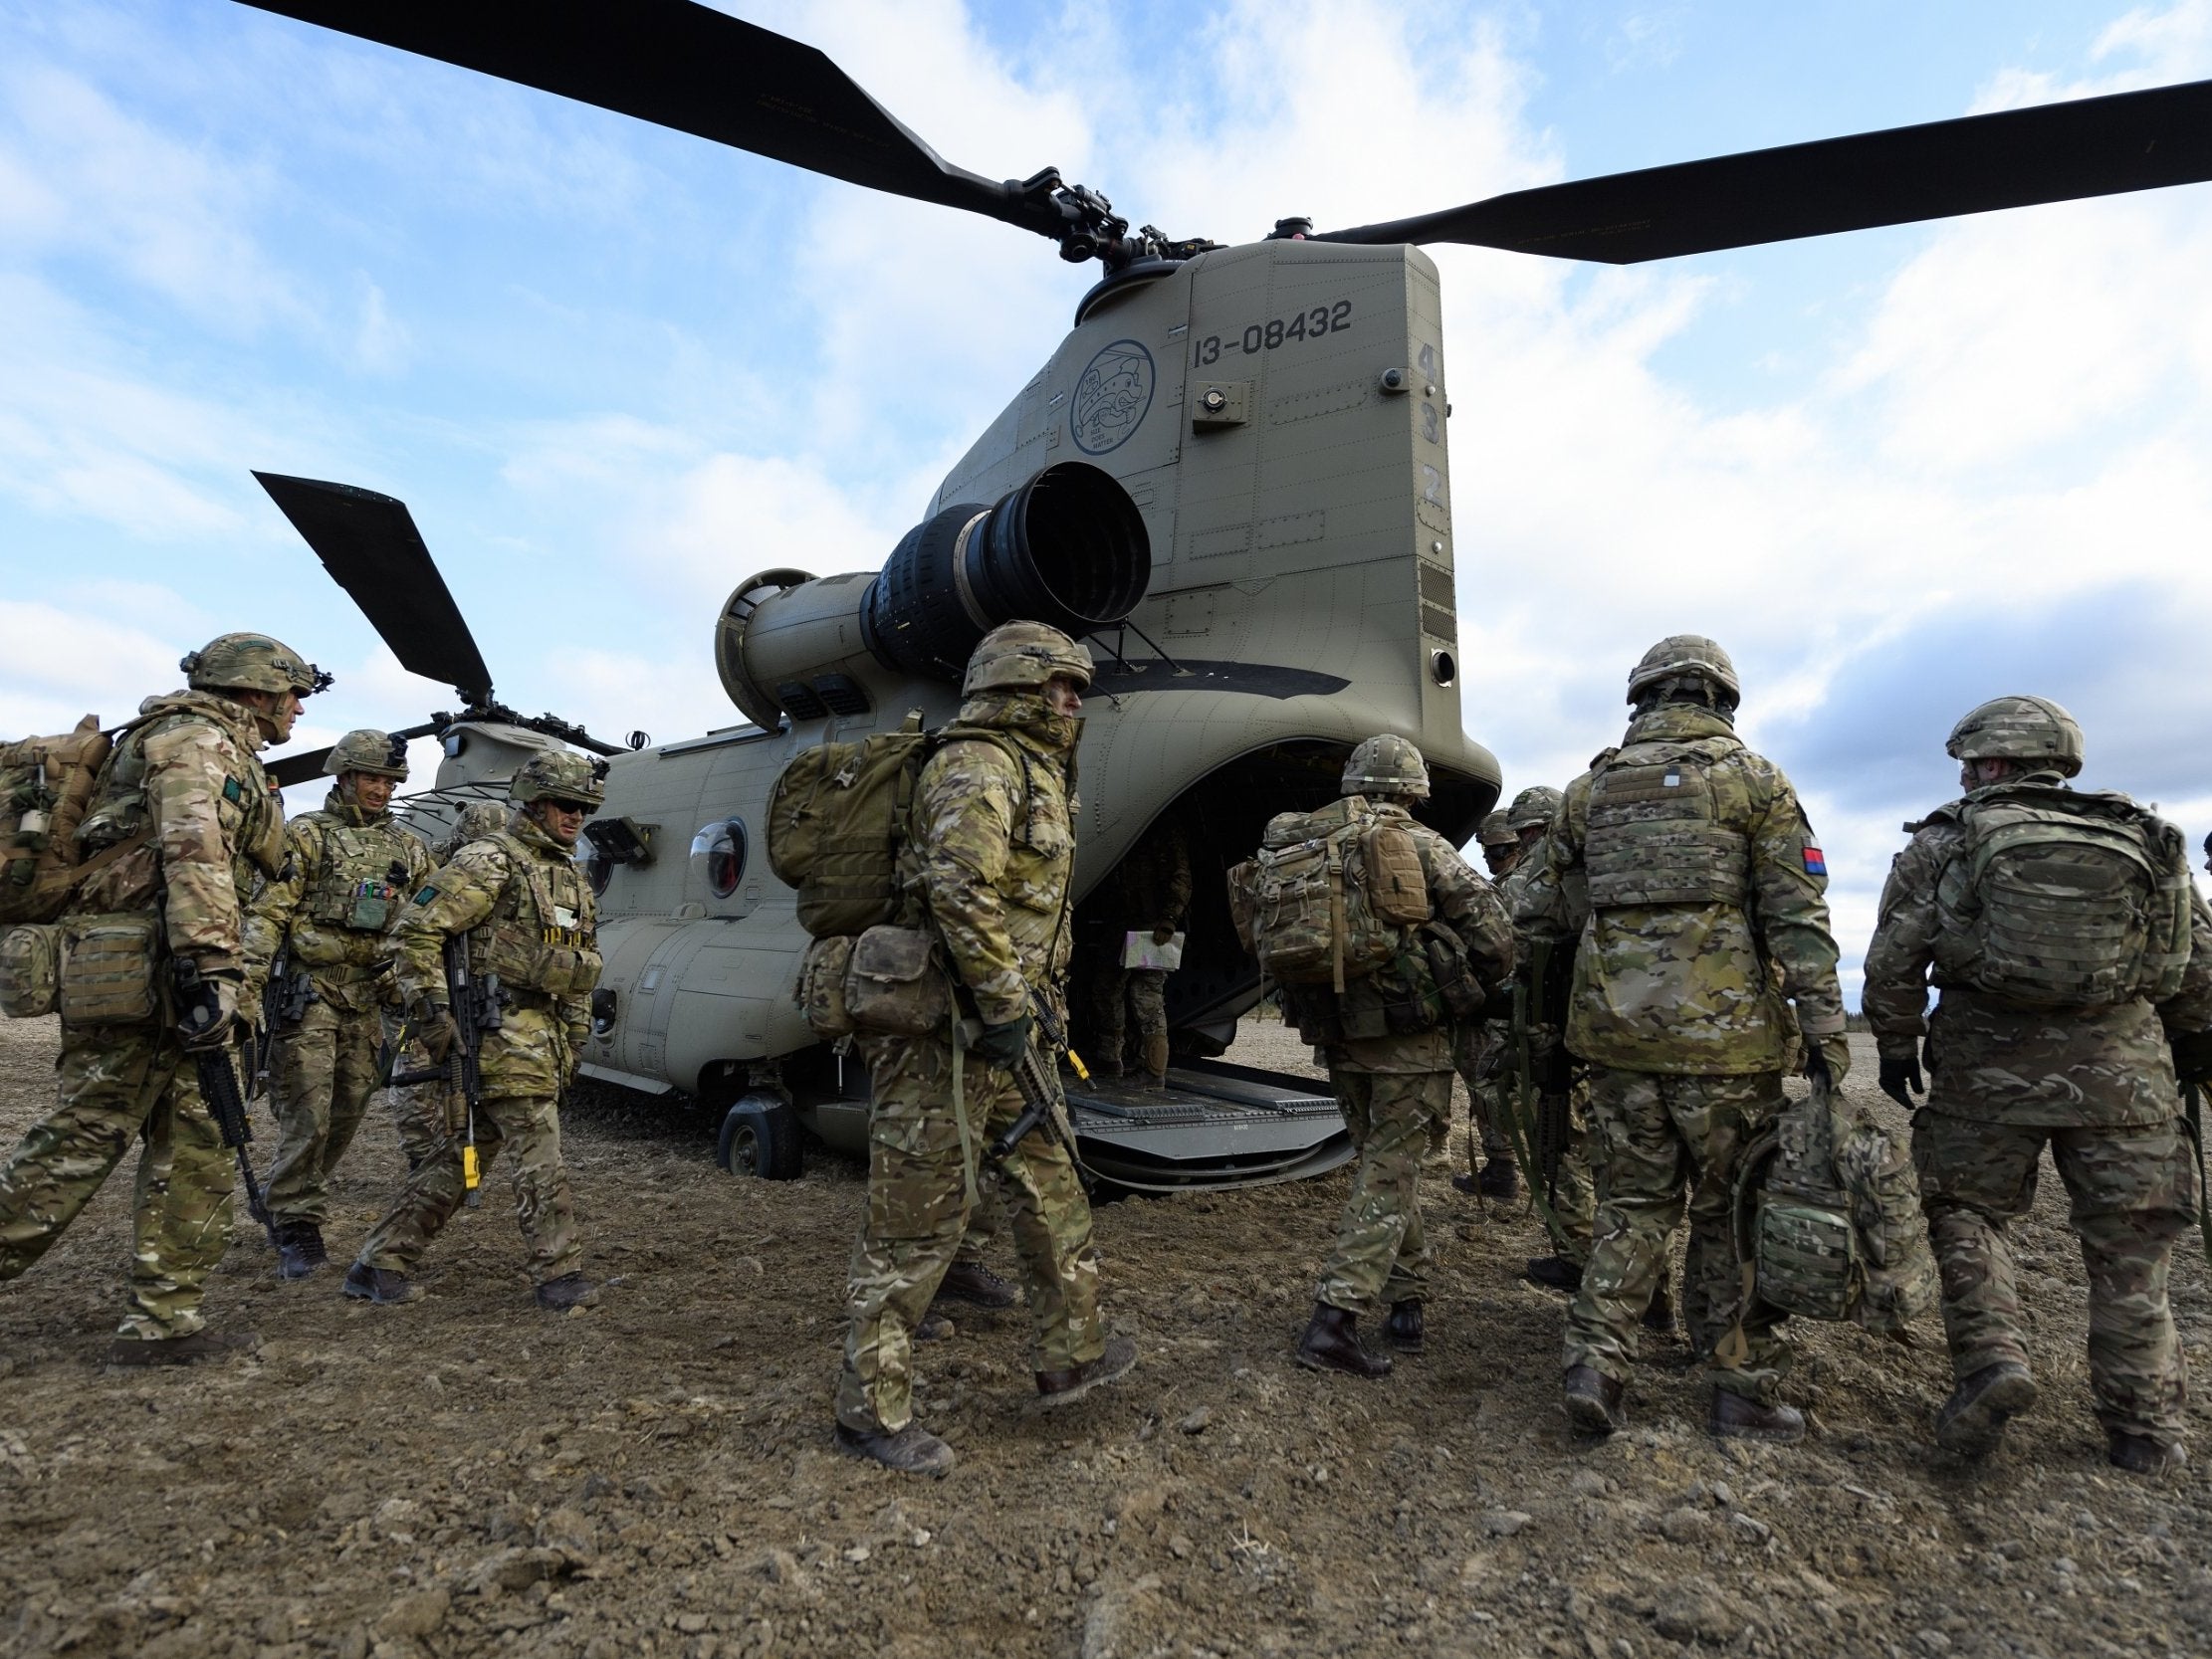 Members of the British Army Royal Irish Battle Group prepare to board a US Army Chinook helicopter during an exercise in Haslemoen, Norway, October 2018